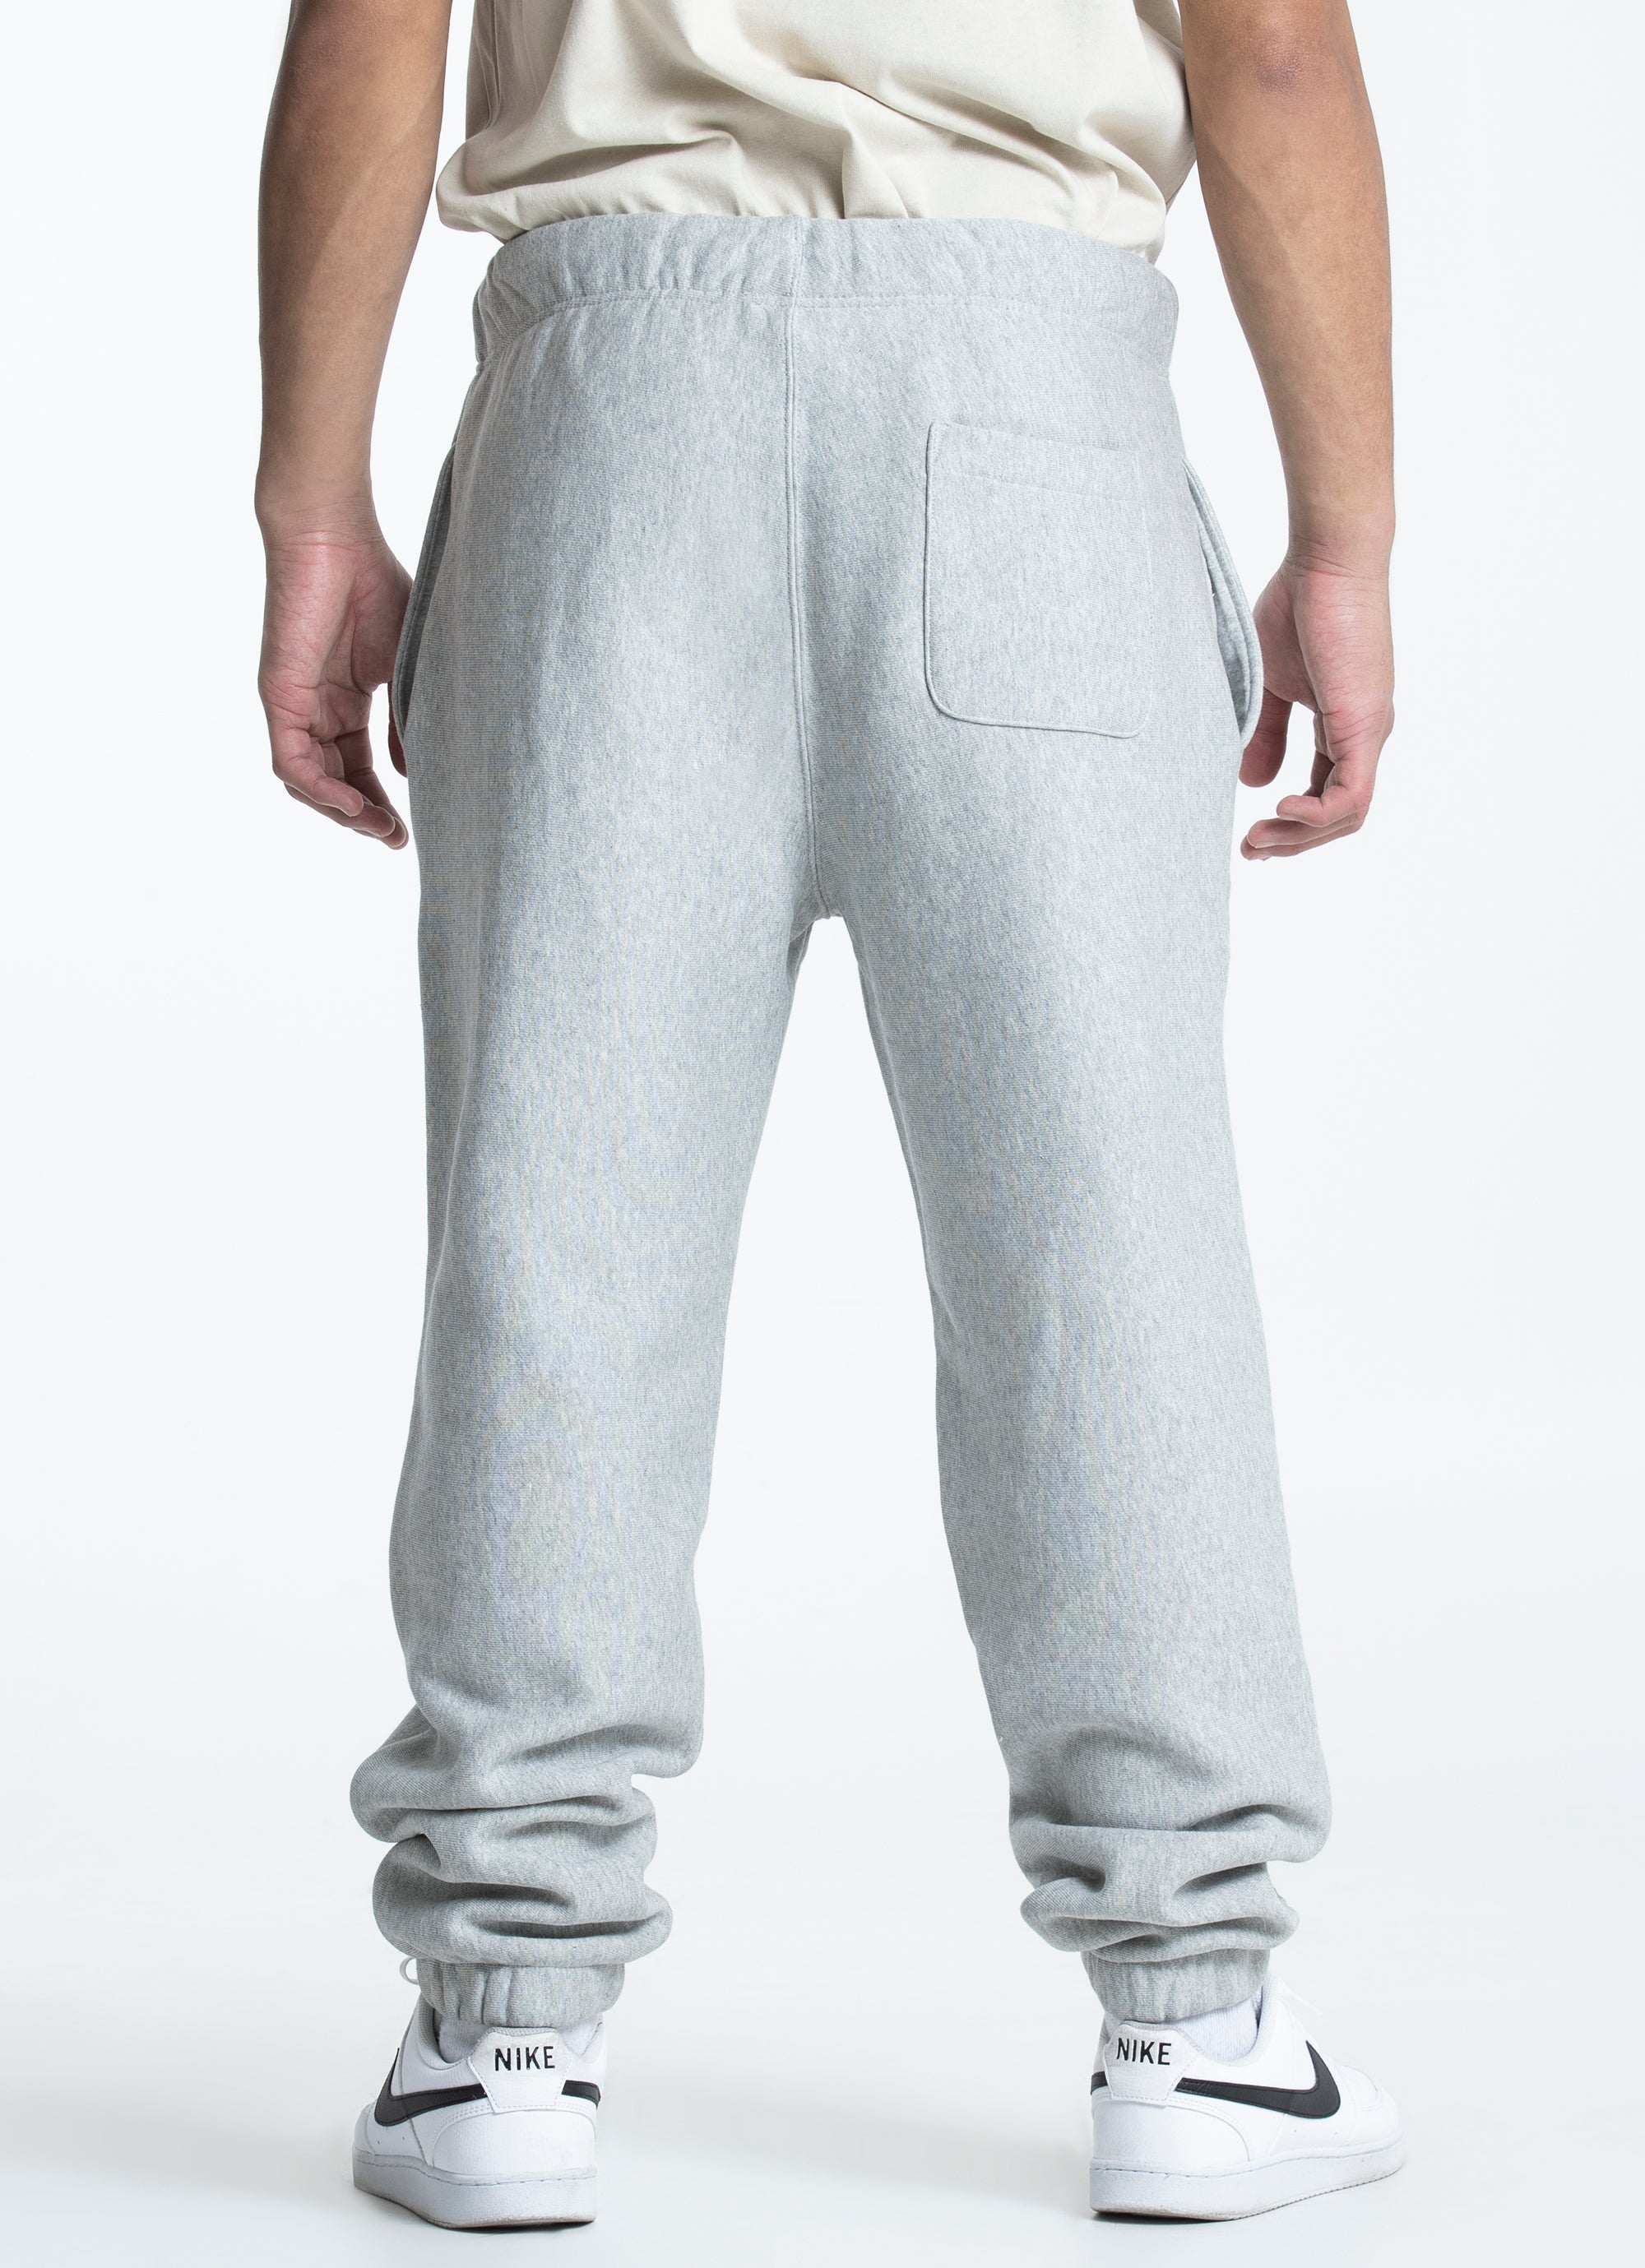 Champion Reverse Weave Loose joggers in Grey for Men